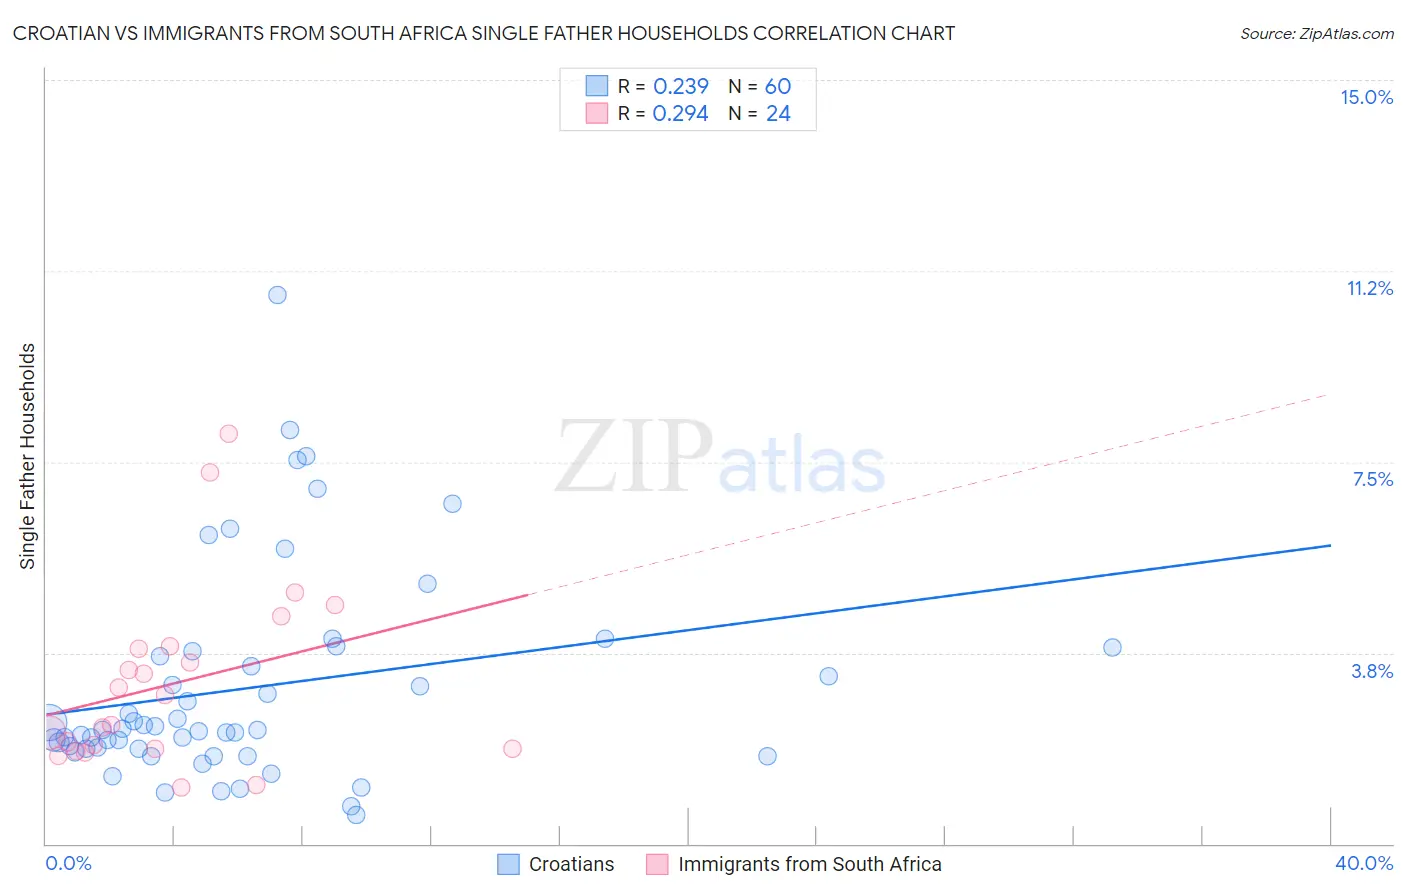 Croatian vs Immigrants from South Africa Single Father Households